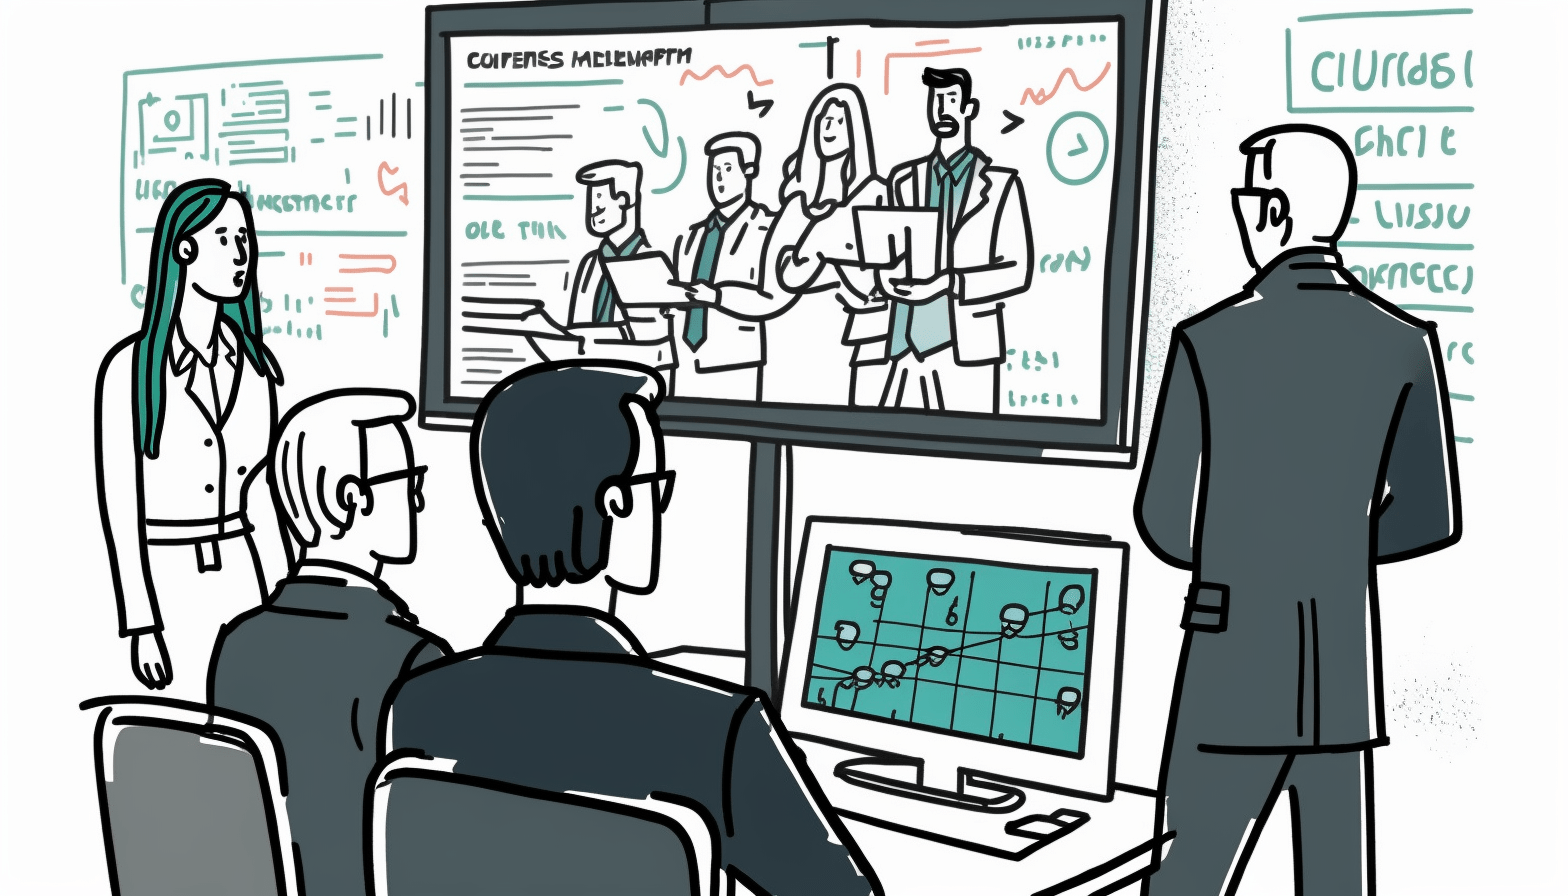 An animated image of a group of employees gathered around a computer or a security expert explaining cybersecurity concepts on a whiteboard.